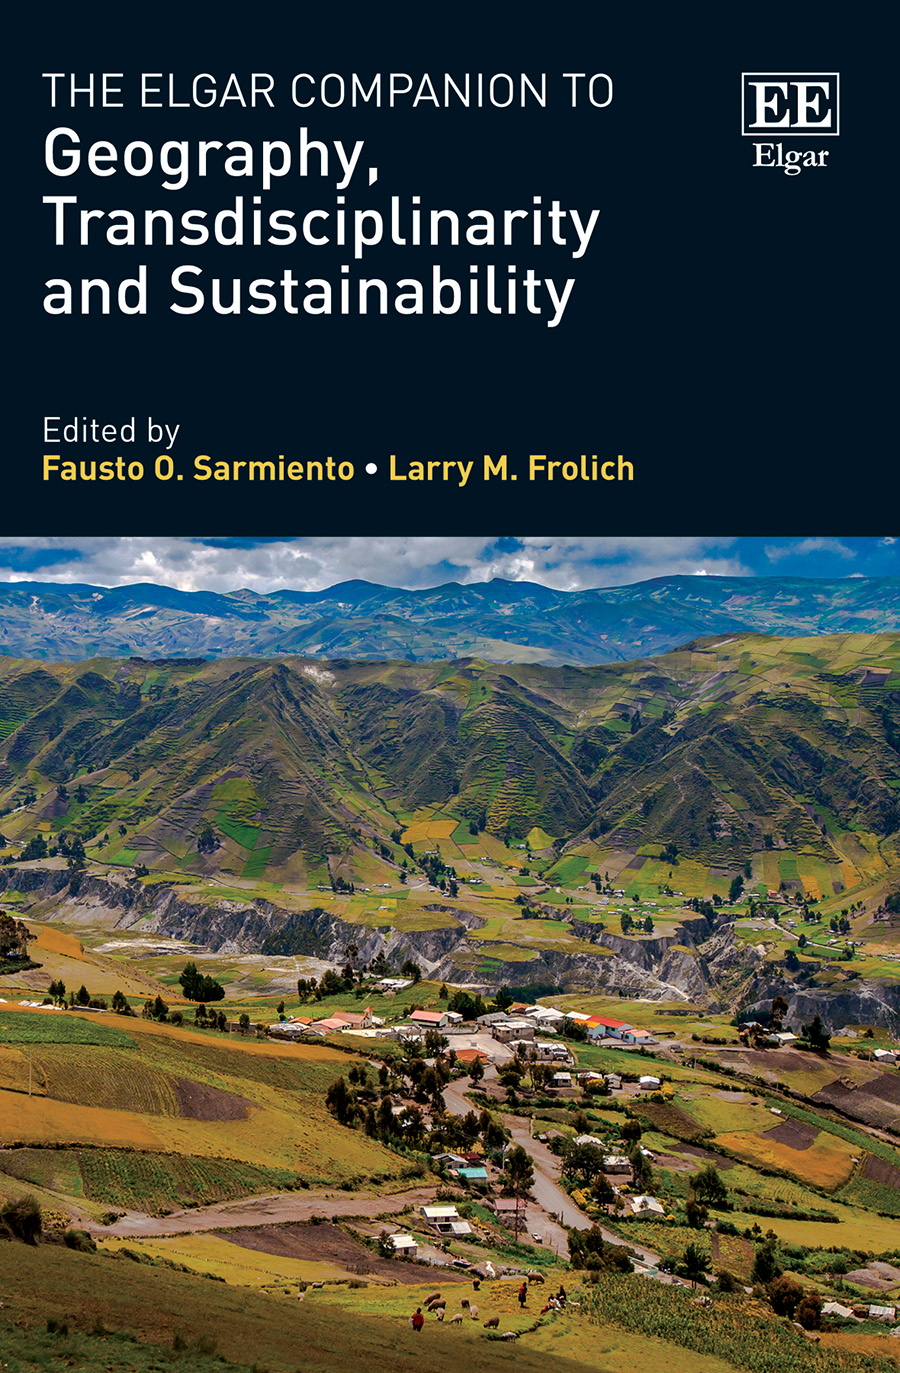 The Elgar Companion to Geography, Transdisciplinarity and Sustainability  